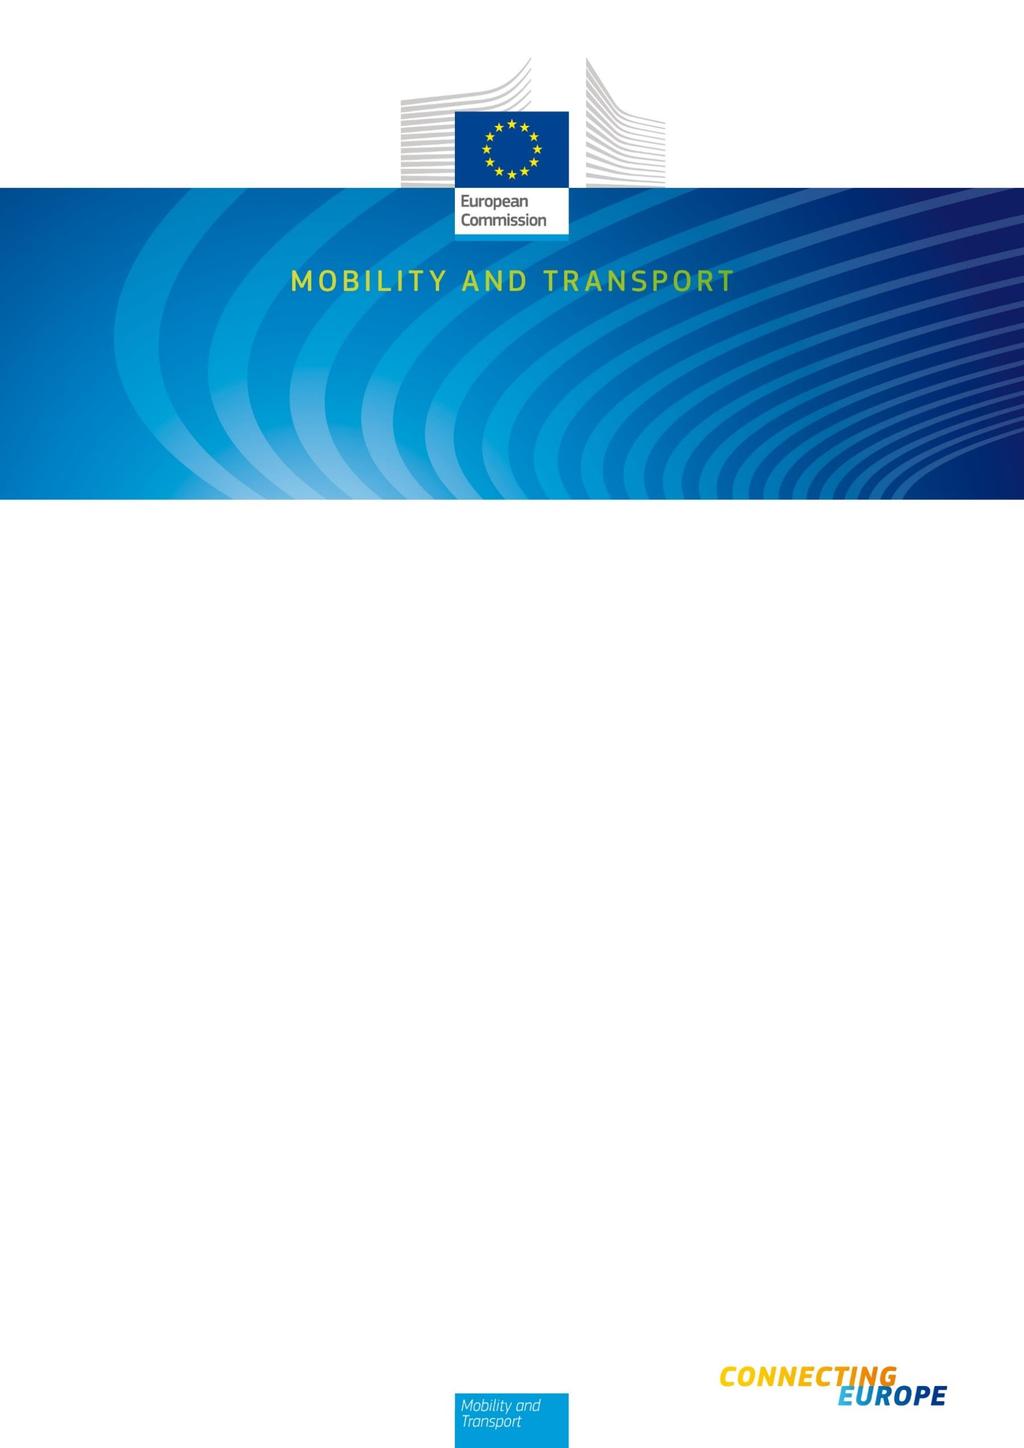 Workshop on "Competitive tendering of public service contracts for rail passenger transport: Meeting the challenge" Brussels - 30 th May 2018 Proceedings These proceedings summarise the main messages